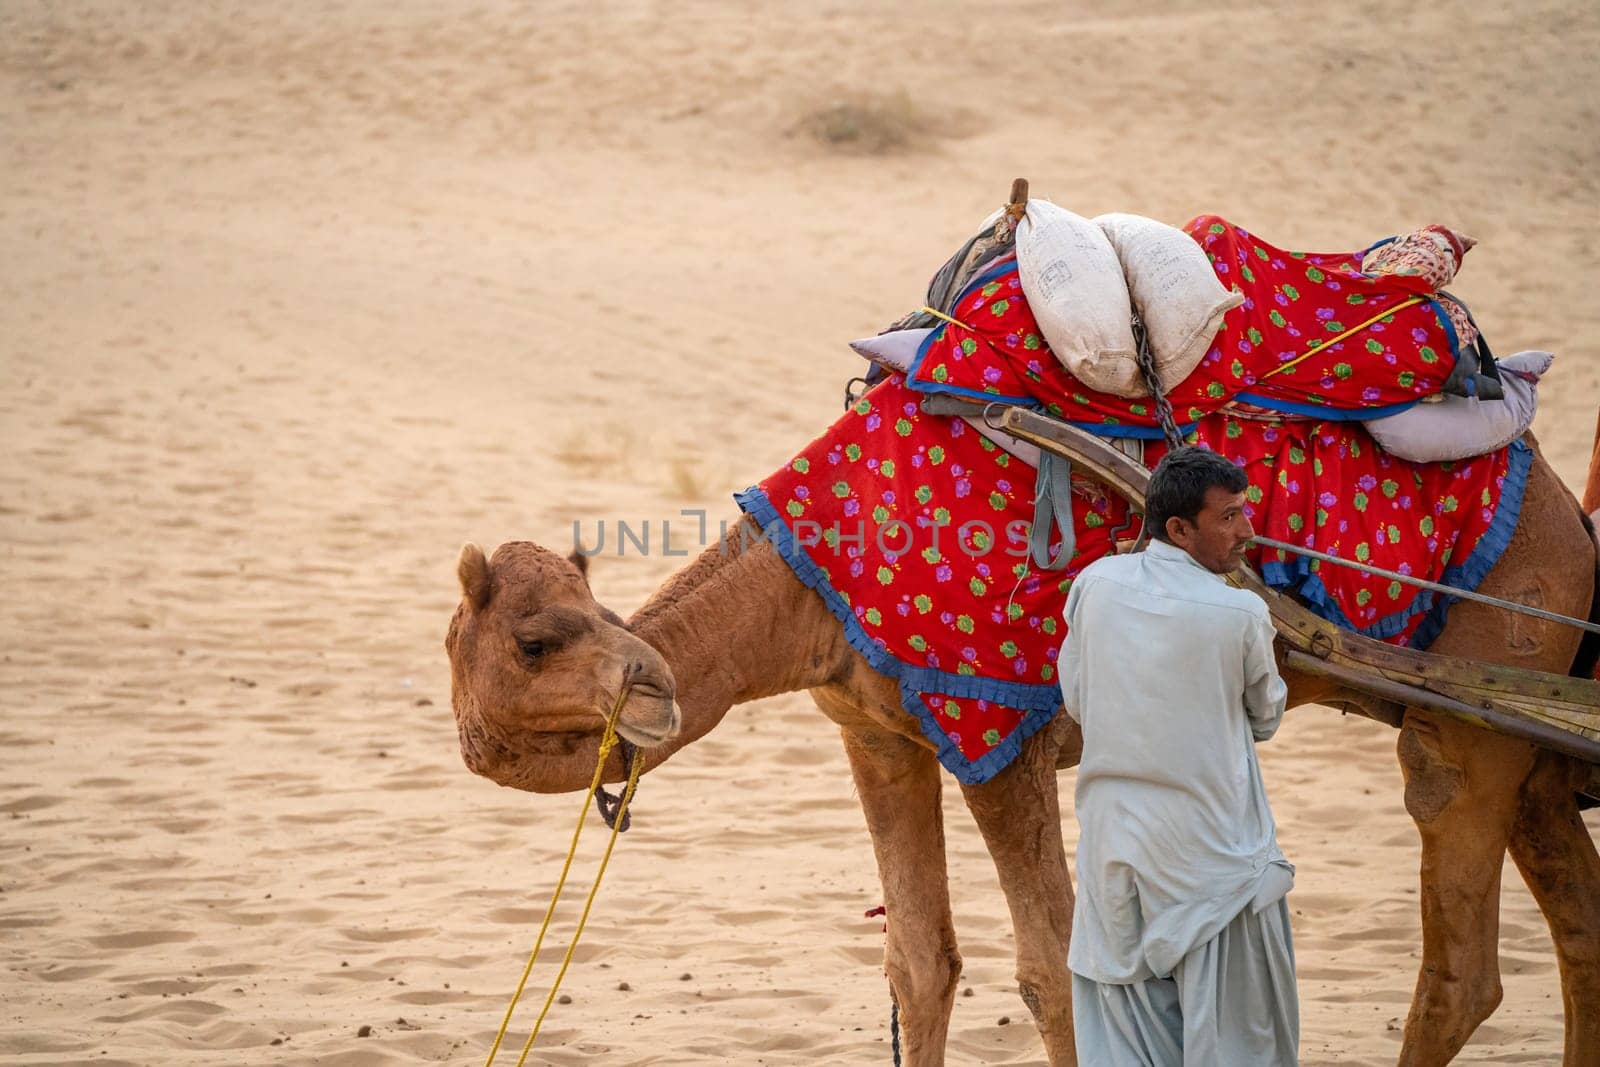 man in traditional kurta pyjama dress standing with camel wearing brightly colored clothes in the middle of sand dunes by Shalinimathur